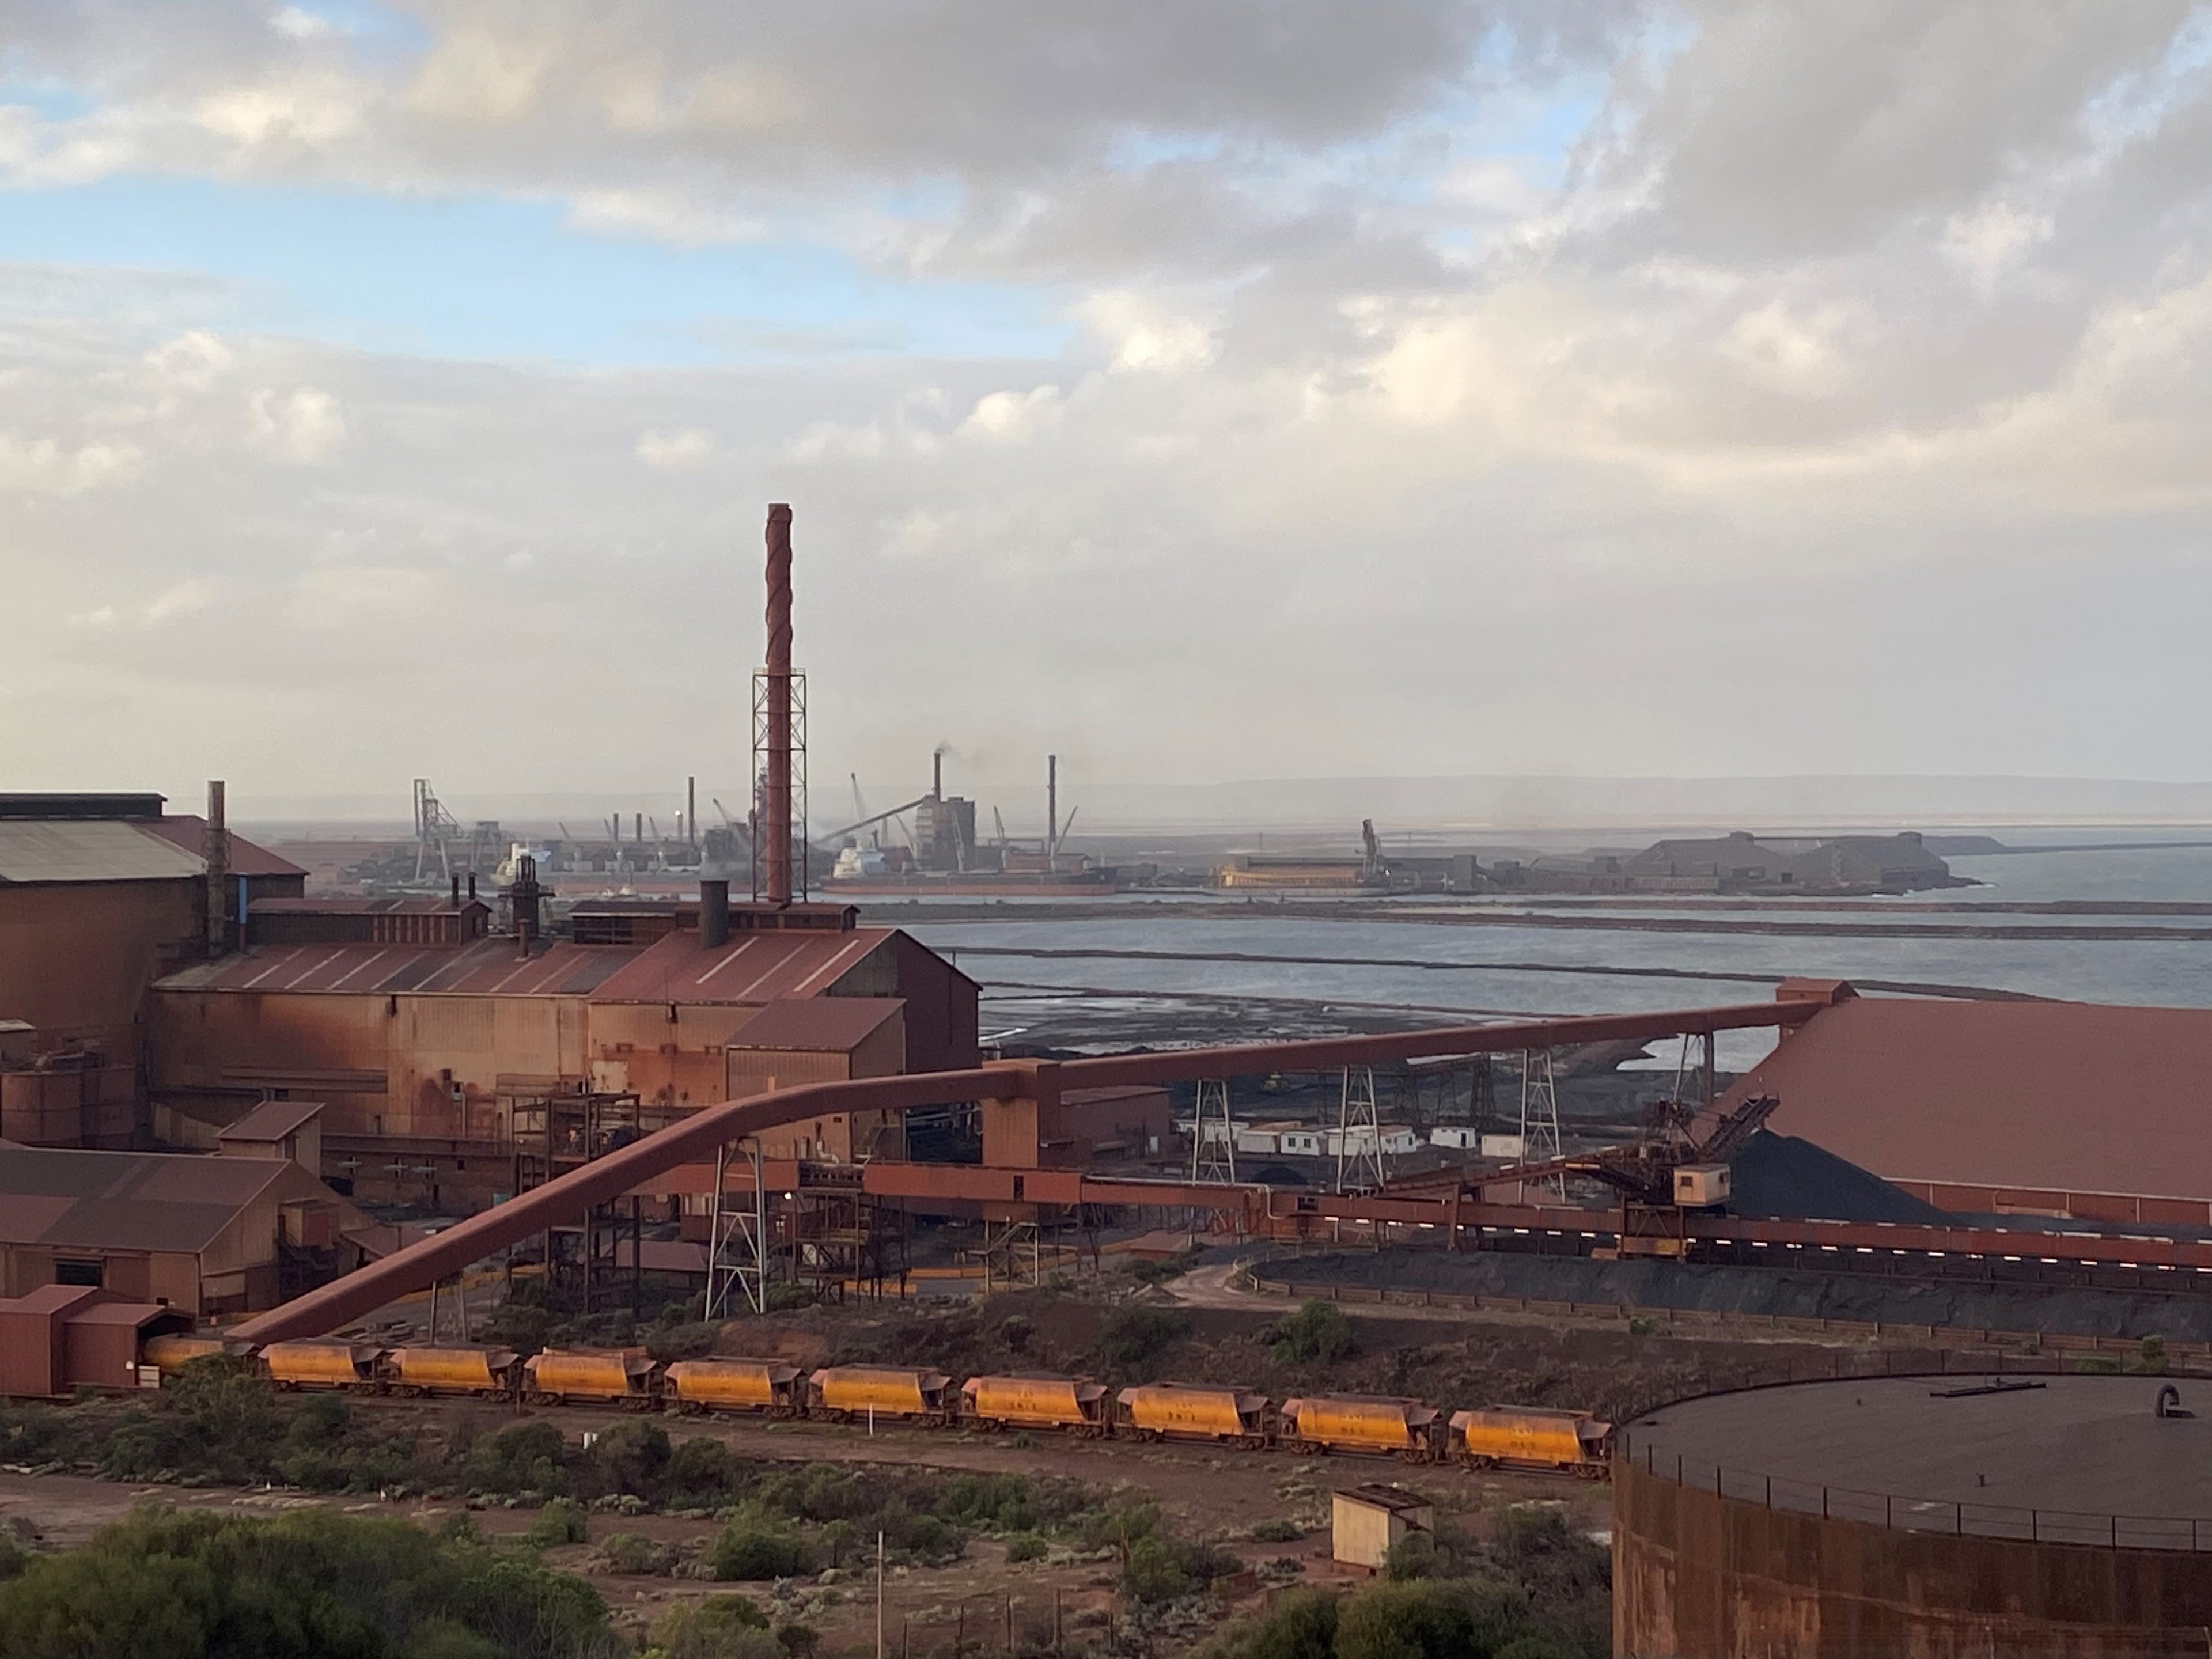 Liberty Primary Whyalla Steelworks is an integrated steelworks with a production capacity of approximately 1.2Mtpa of steel